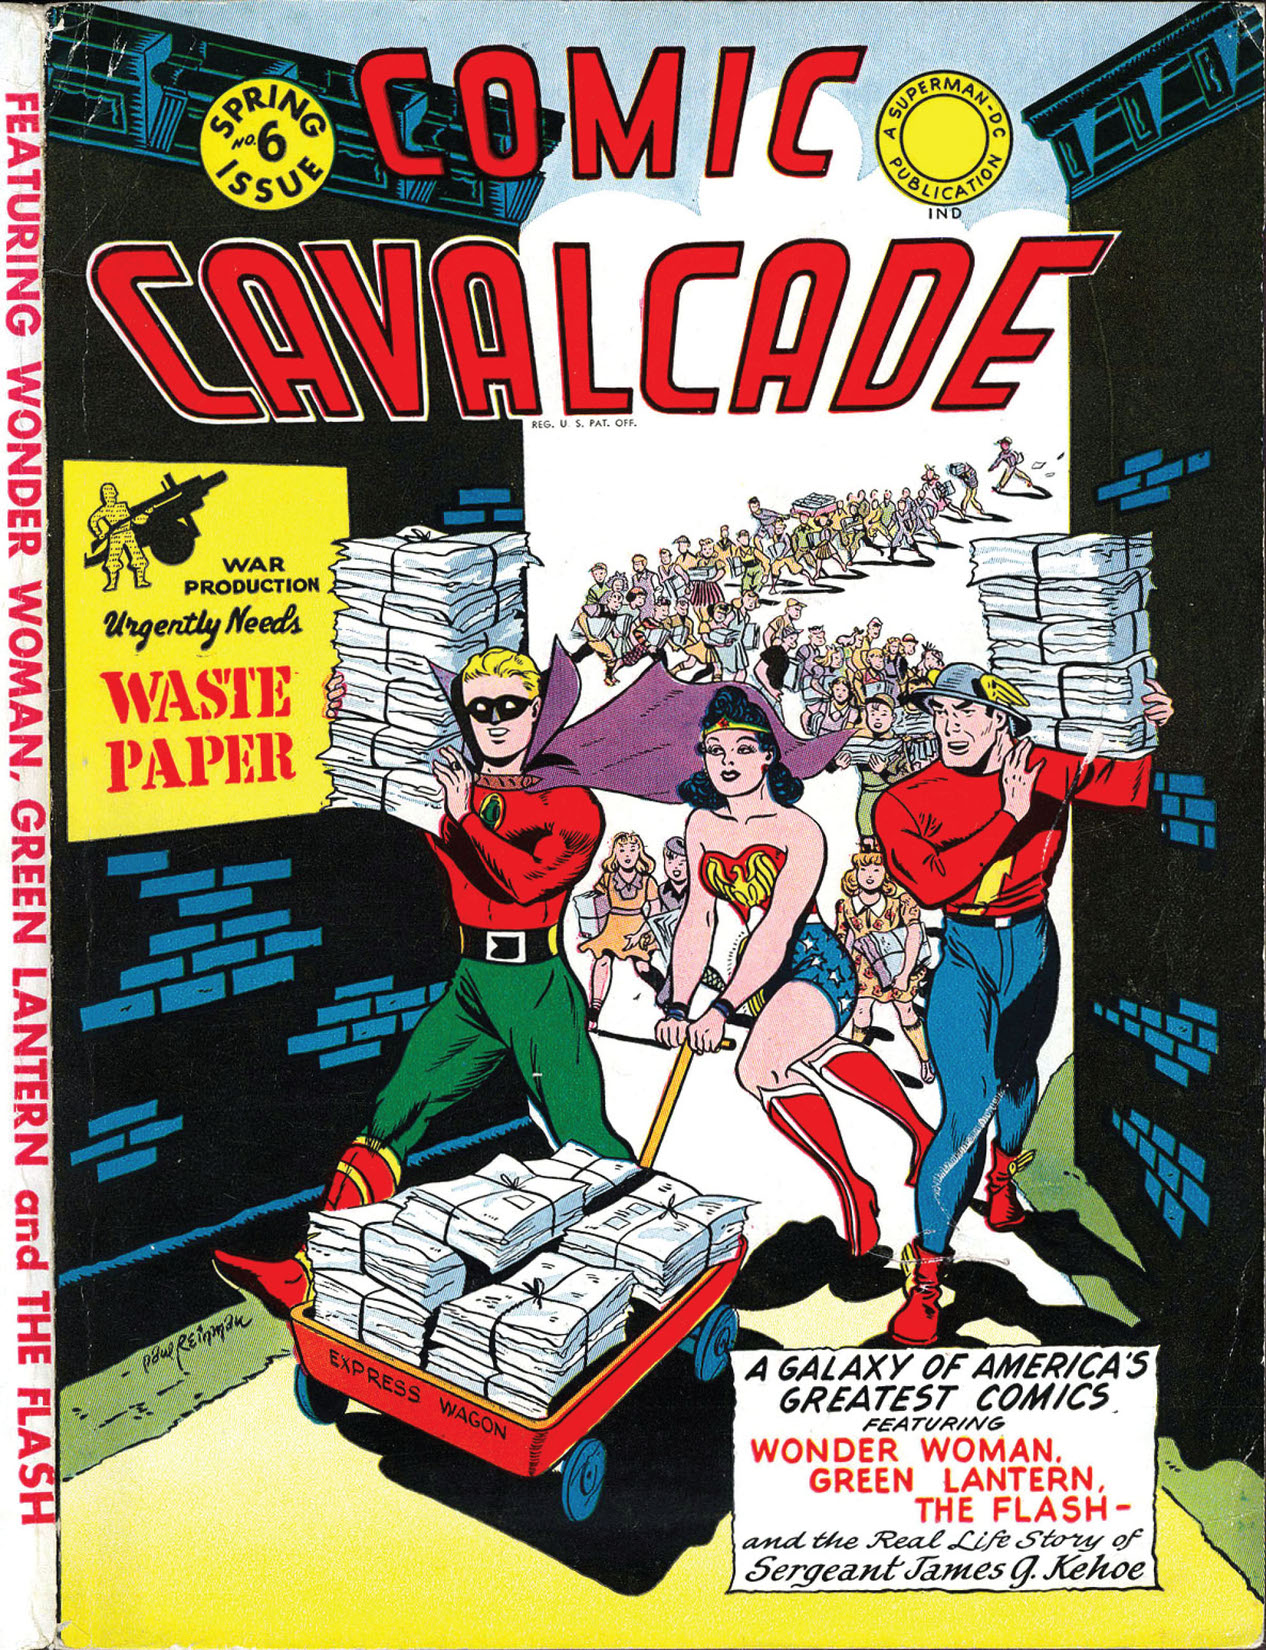 Comic Cavalcade #6 preview images